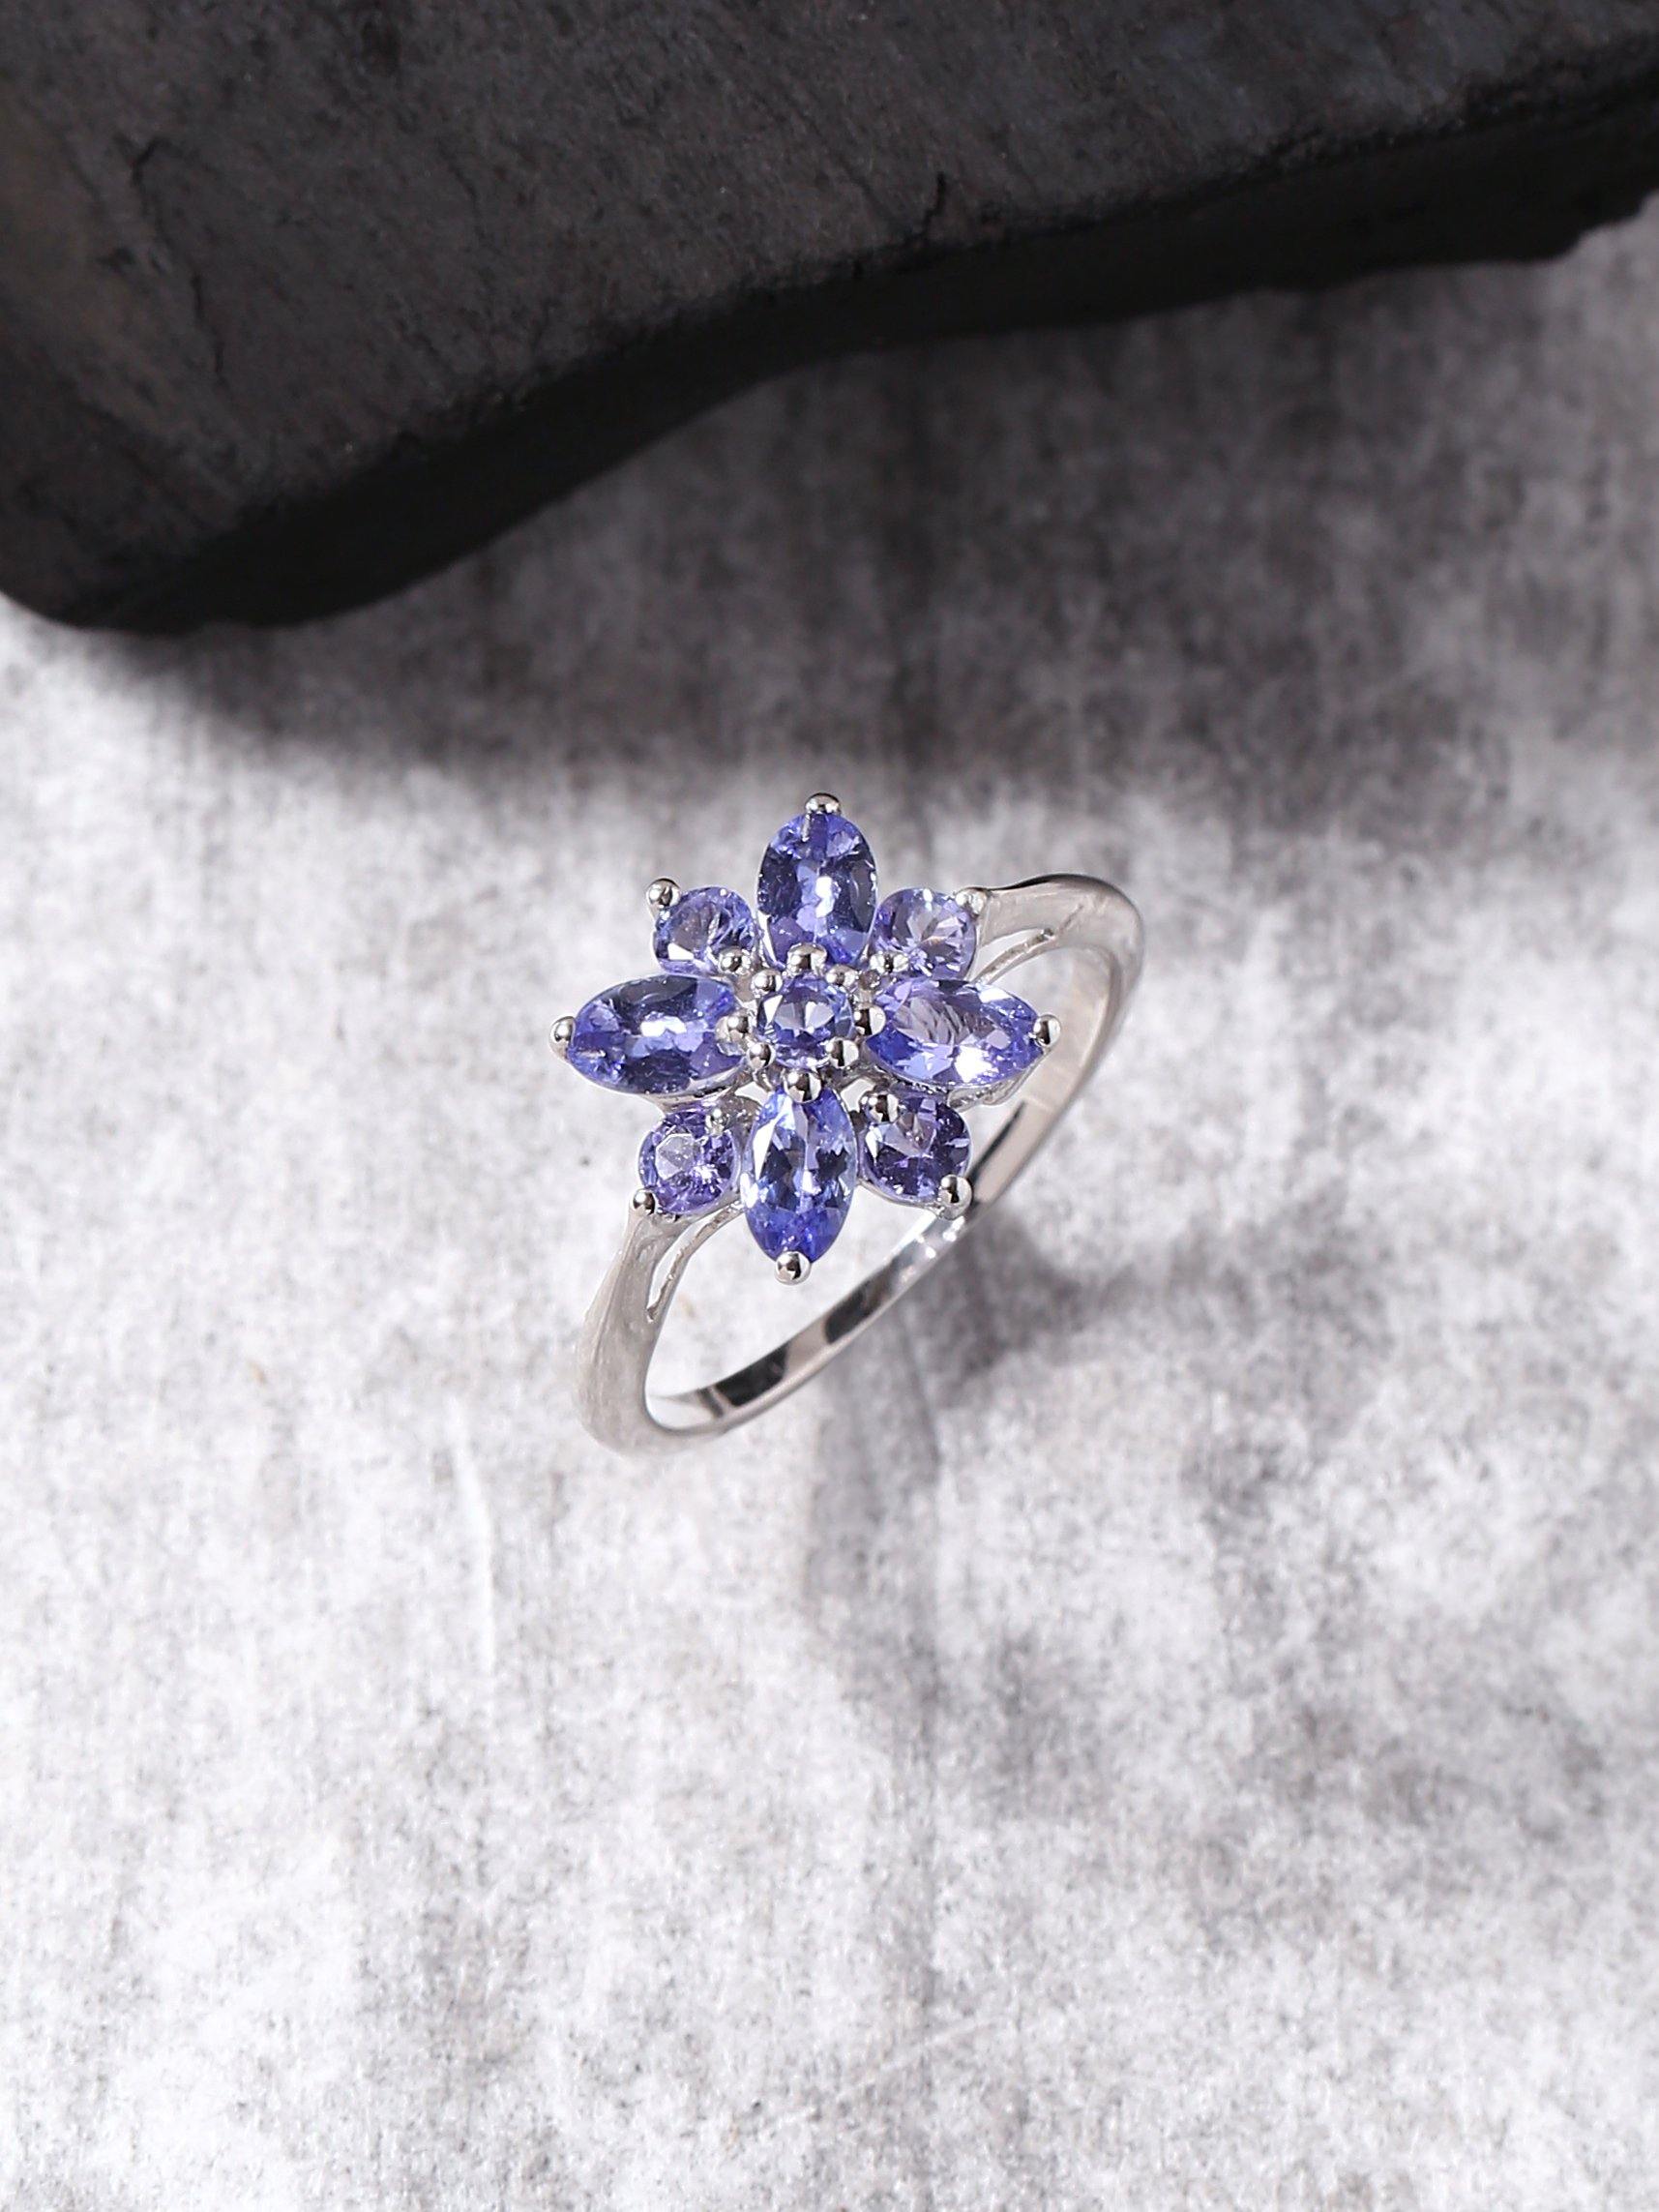 Tanzanite Solid 925 Sterling Silver Flower Cluster Ring Jewelry - YoTreasure